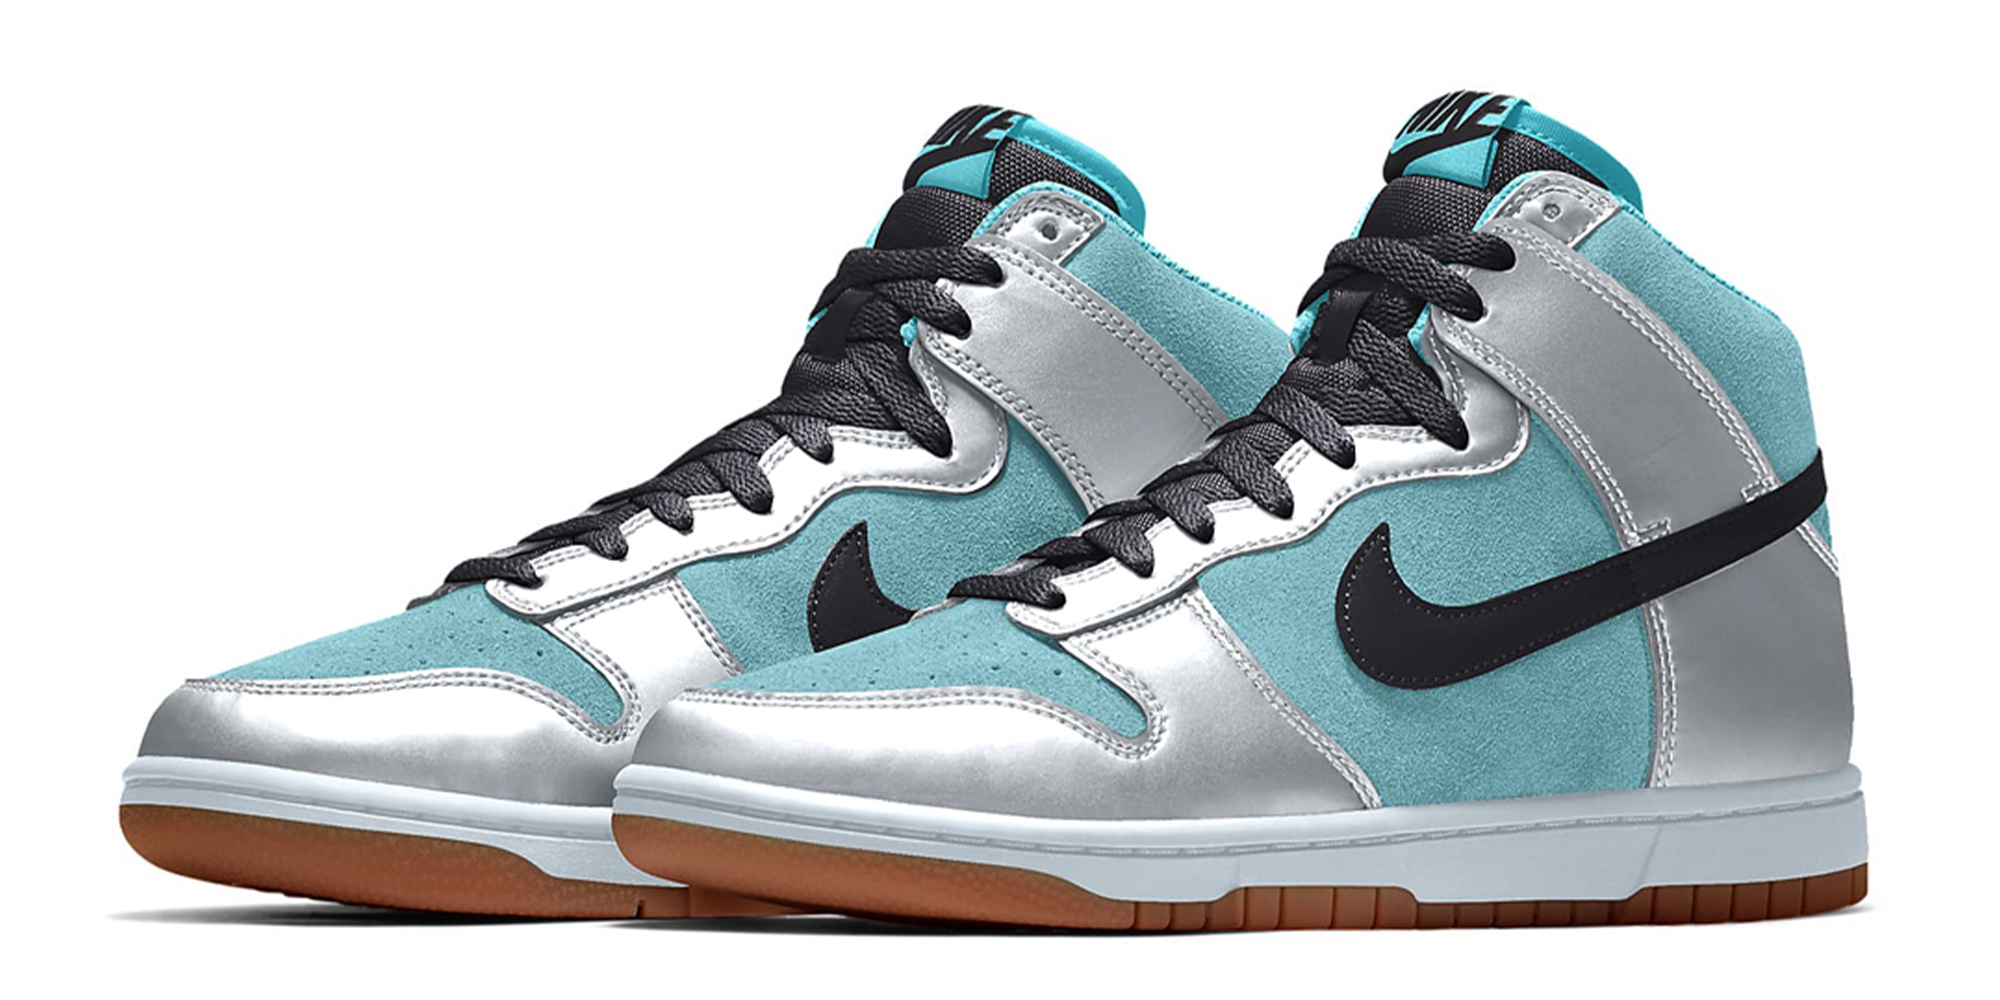 Dunk High Customization is Coming to 